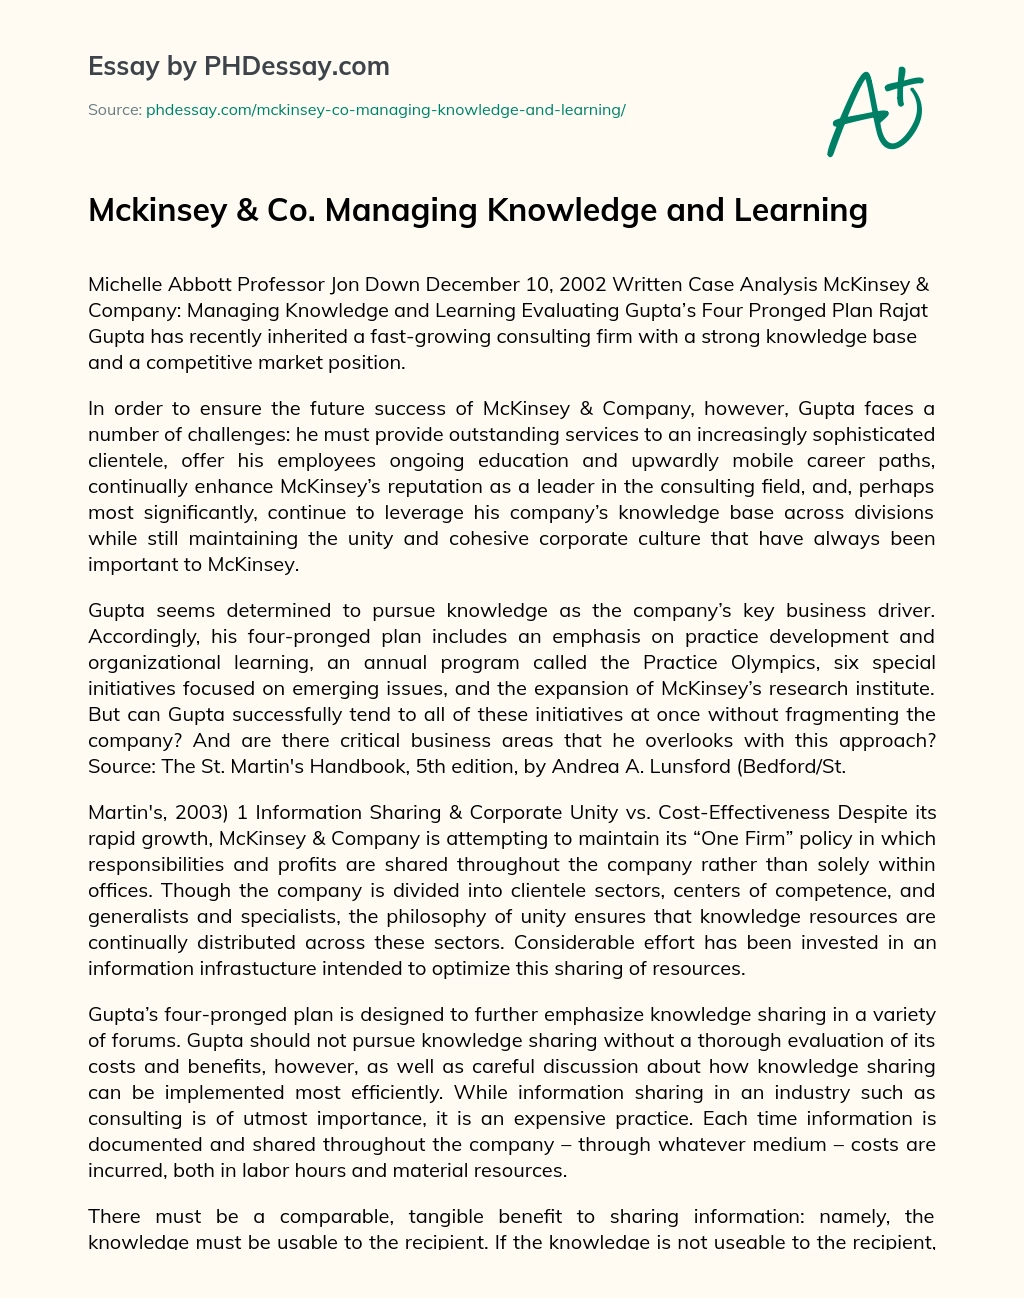 Mckinsey & Co. Managing Knowledge and Learning essay